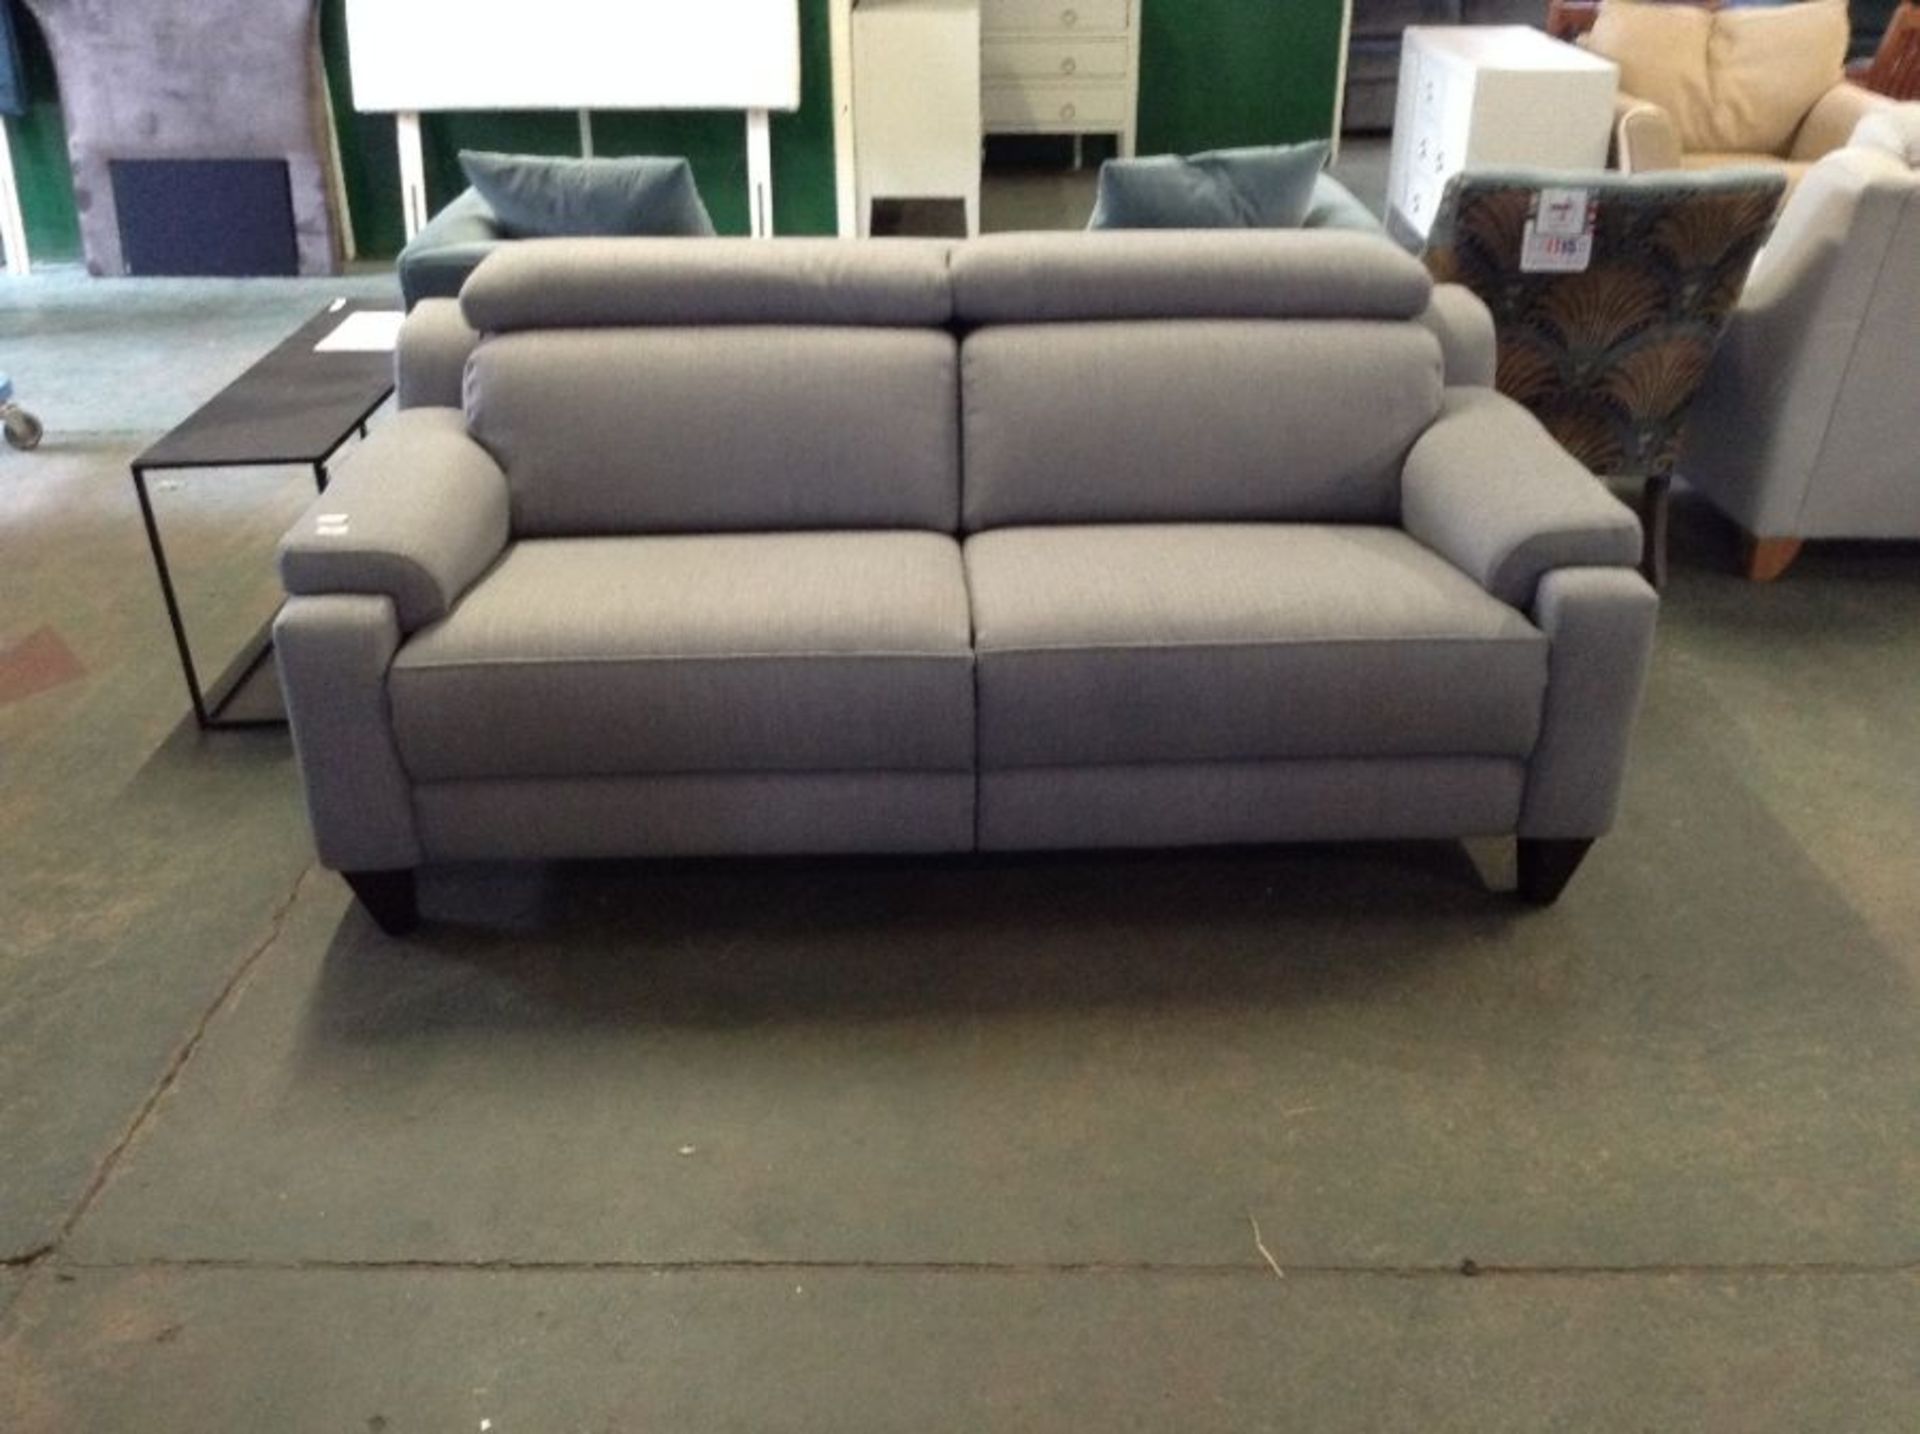 GREY FABRIC WITH ADJUSTABLE HEADREST 3 SEATER SOF